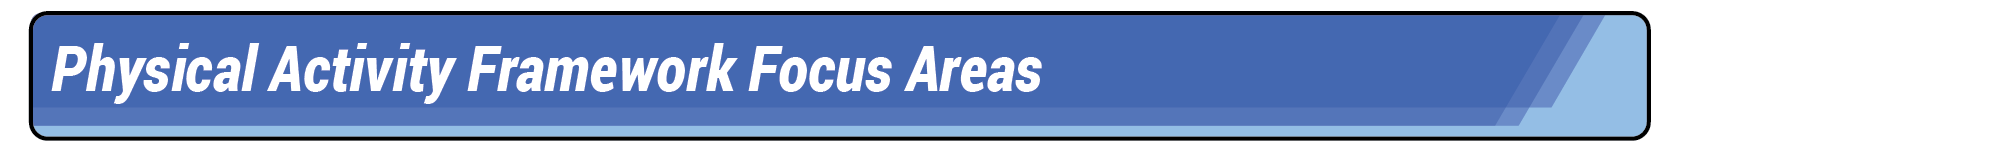 Physical activity framework focus areas resources banner